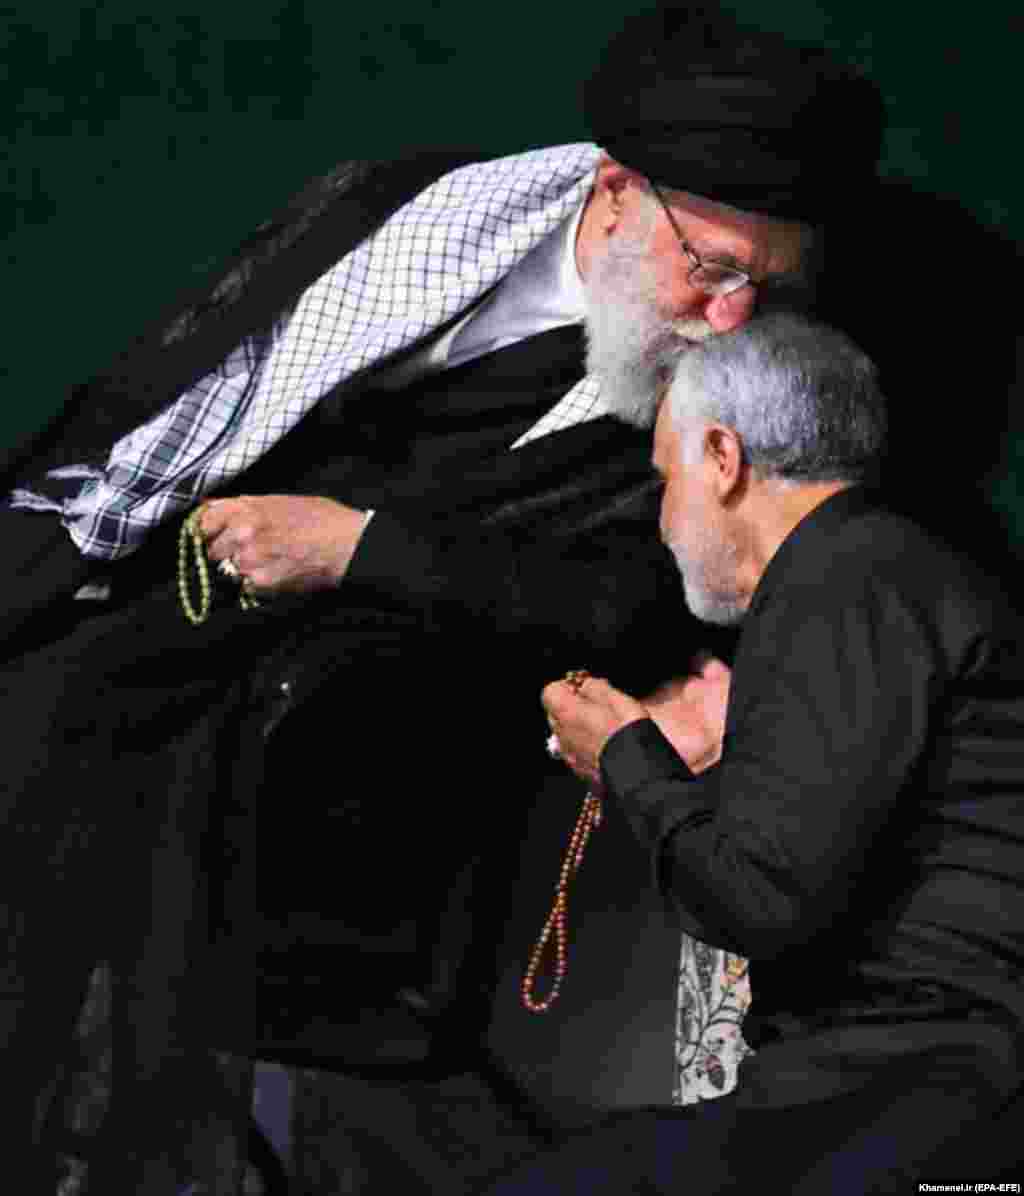 Qasem Soleimani became commander of the Quds Force in 1998, the foreign arm of&nbsp;Iran&#39;s Islamic Revolutionary Guards Corps. Under Soleimani&#39;s leadership, the Quds Force expanded Tehran&#39;s influence beyond Iran&#39;s borders and throughout the Middle East -- from Lebanon and Yemen to Iraq and Syria.